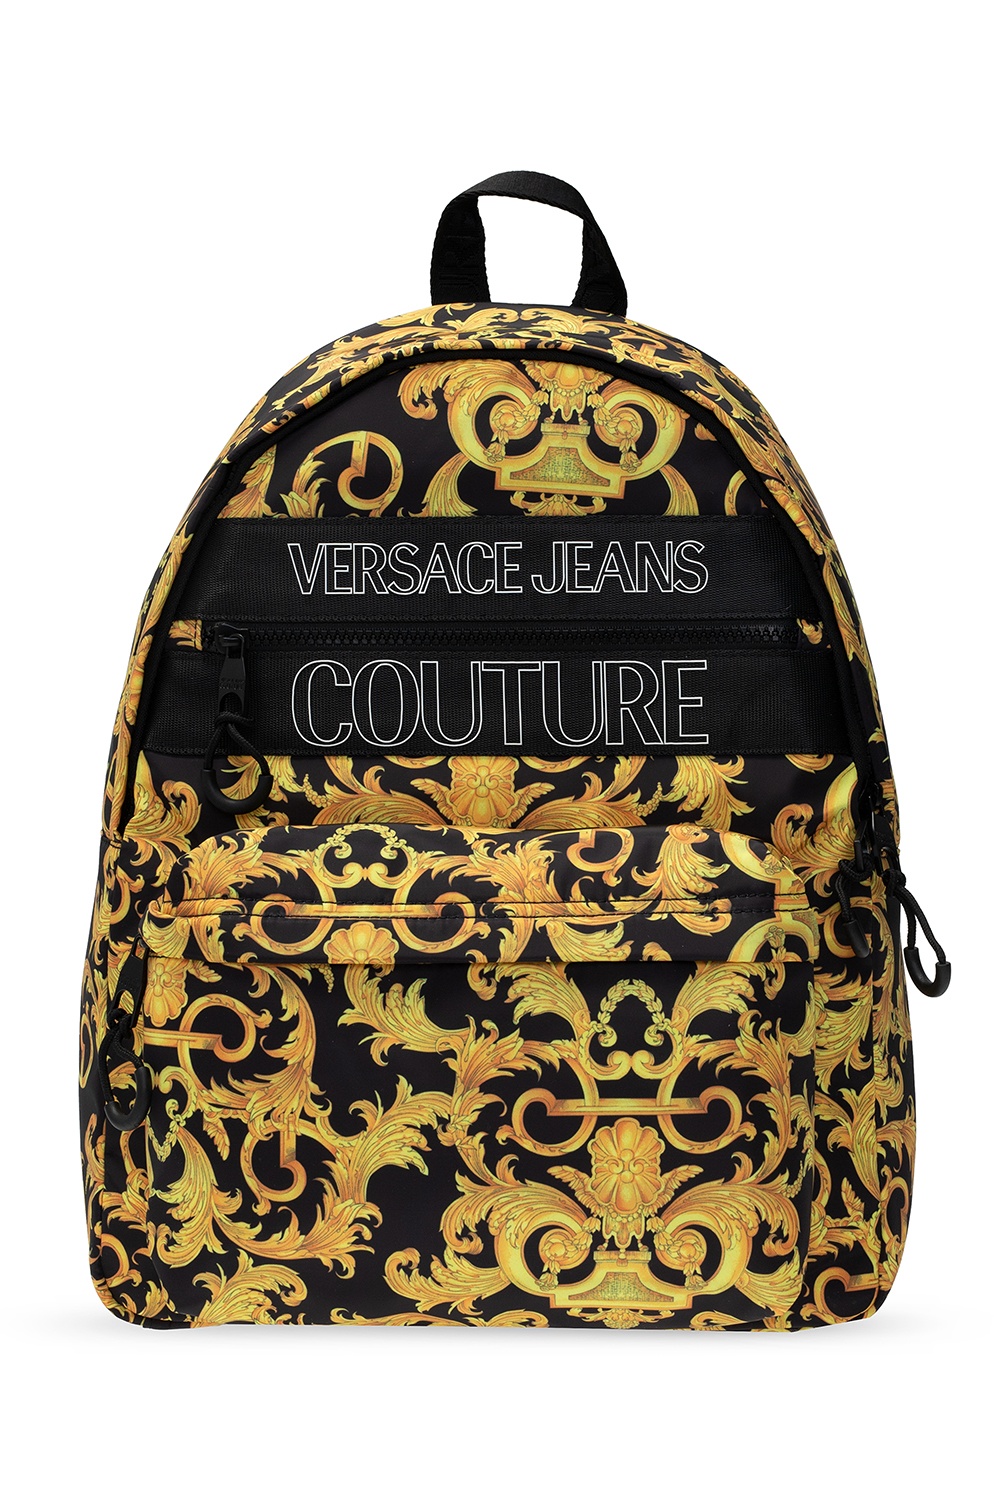 what is the difference between versace and versace jeans